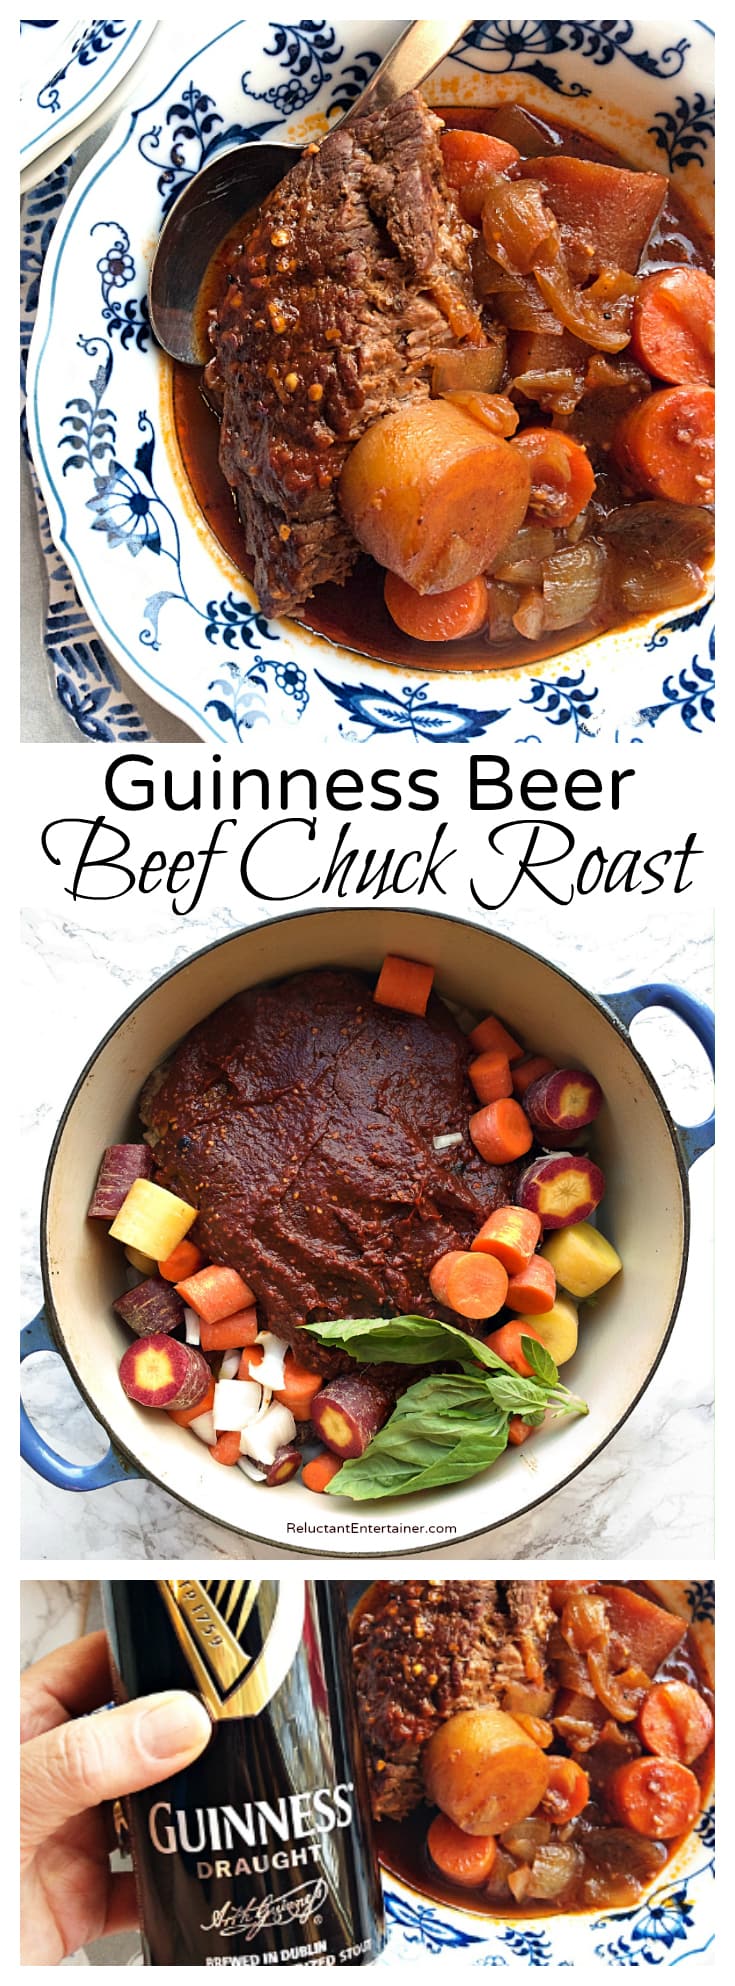 Guinness Beer Beef Chuck Roast Recipe - Reluctant Entertainer